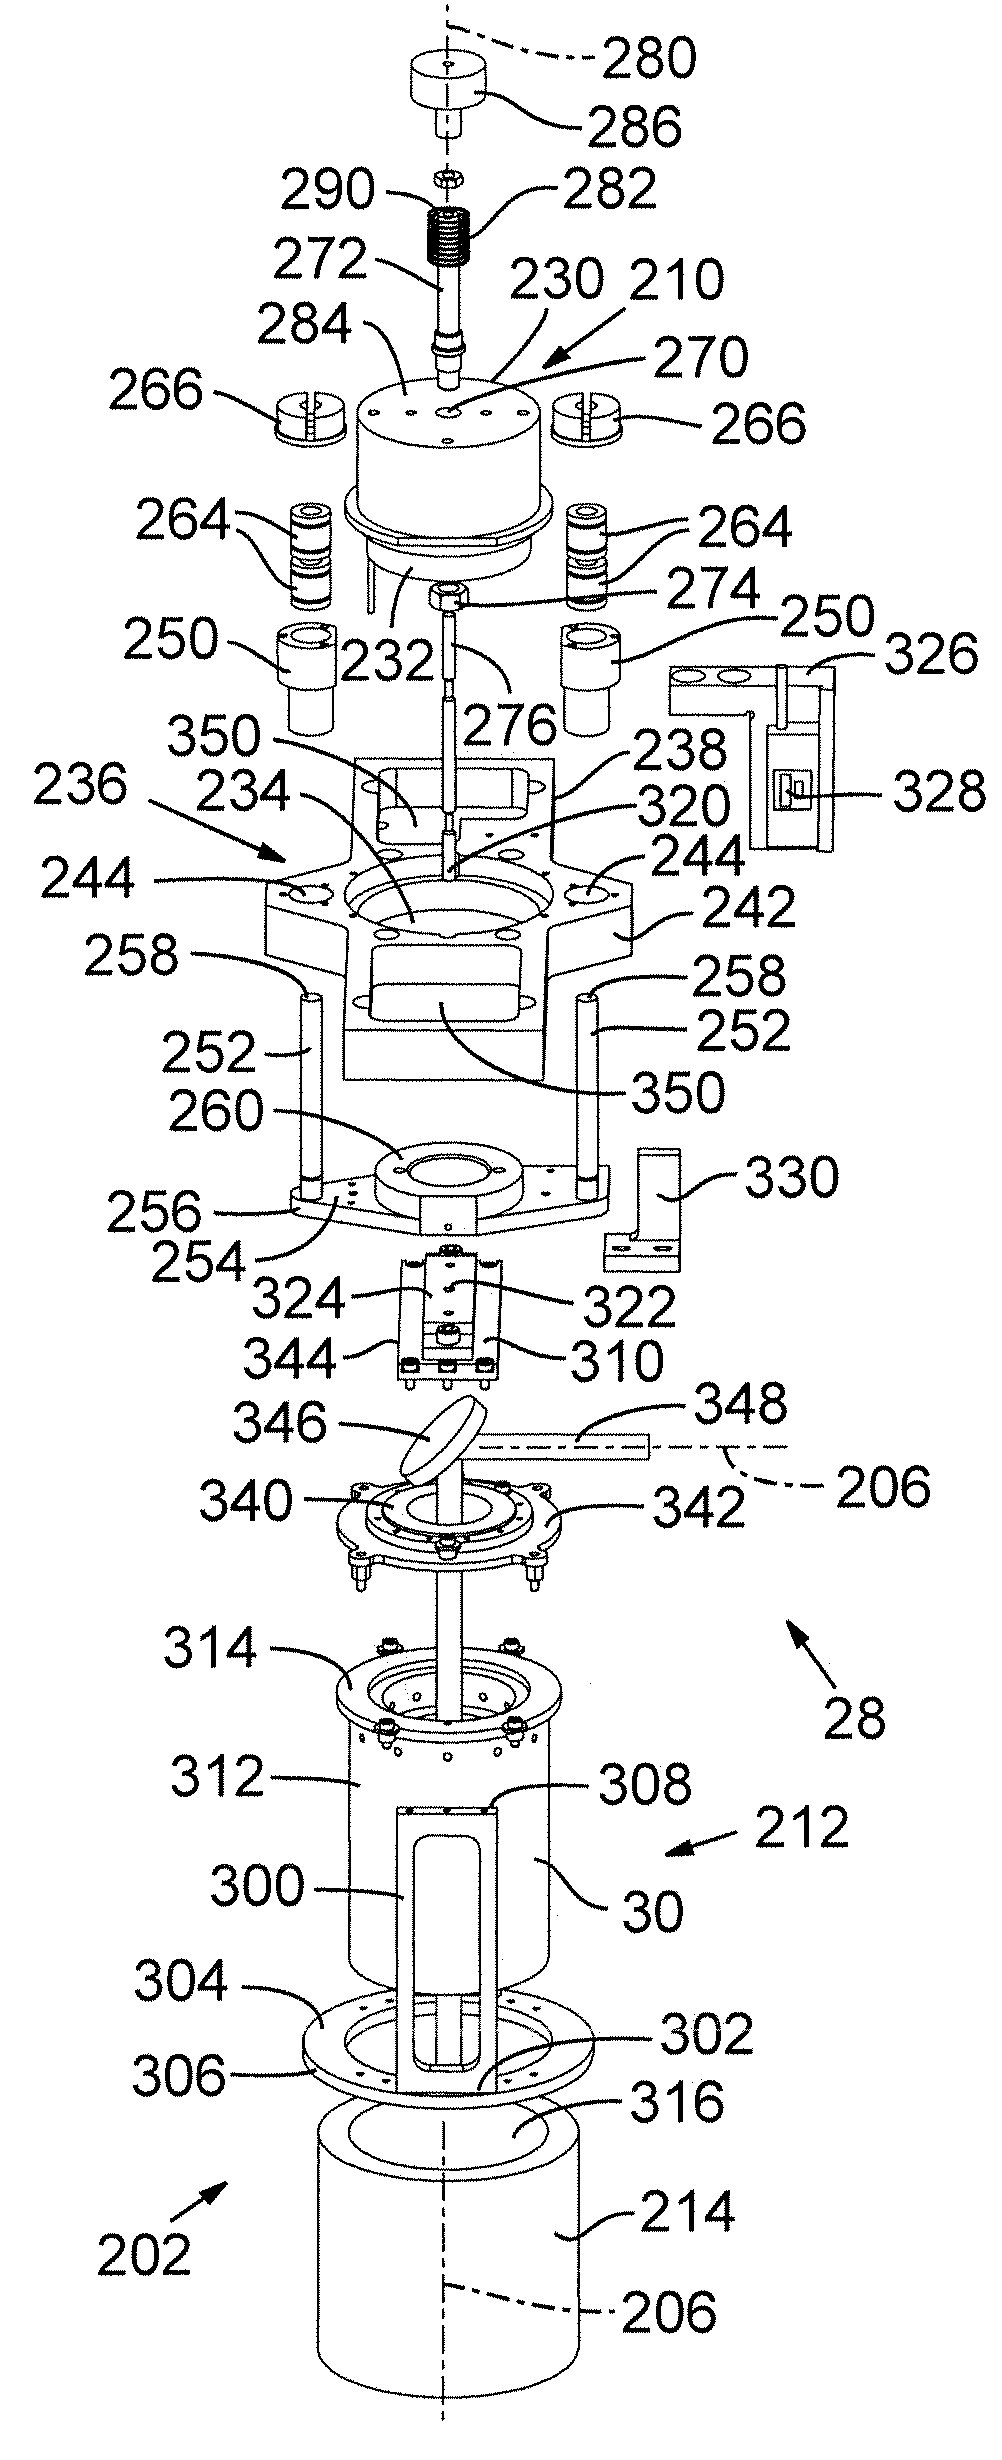 Air bearing assembly for guiding motion of optical components of a laser processing system